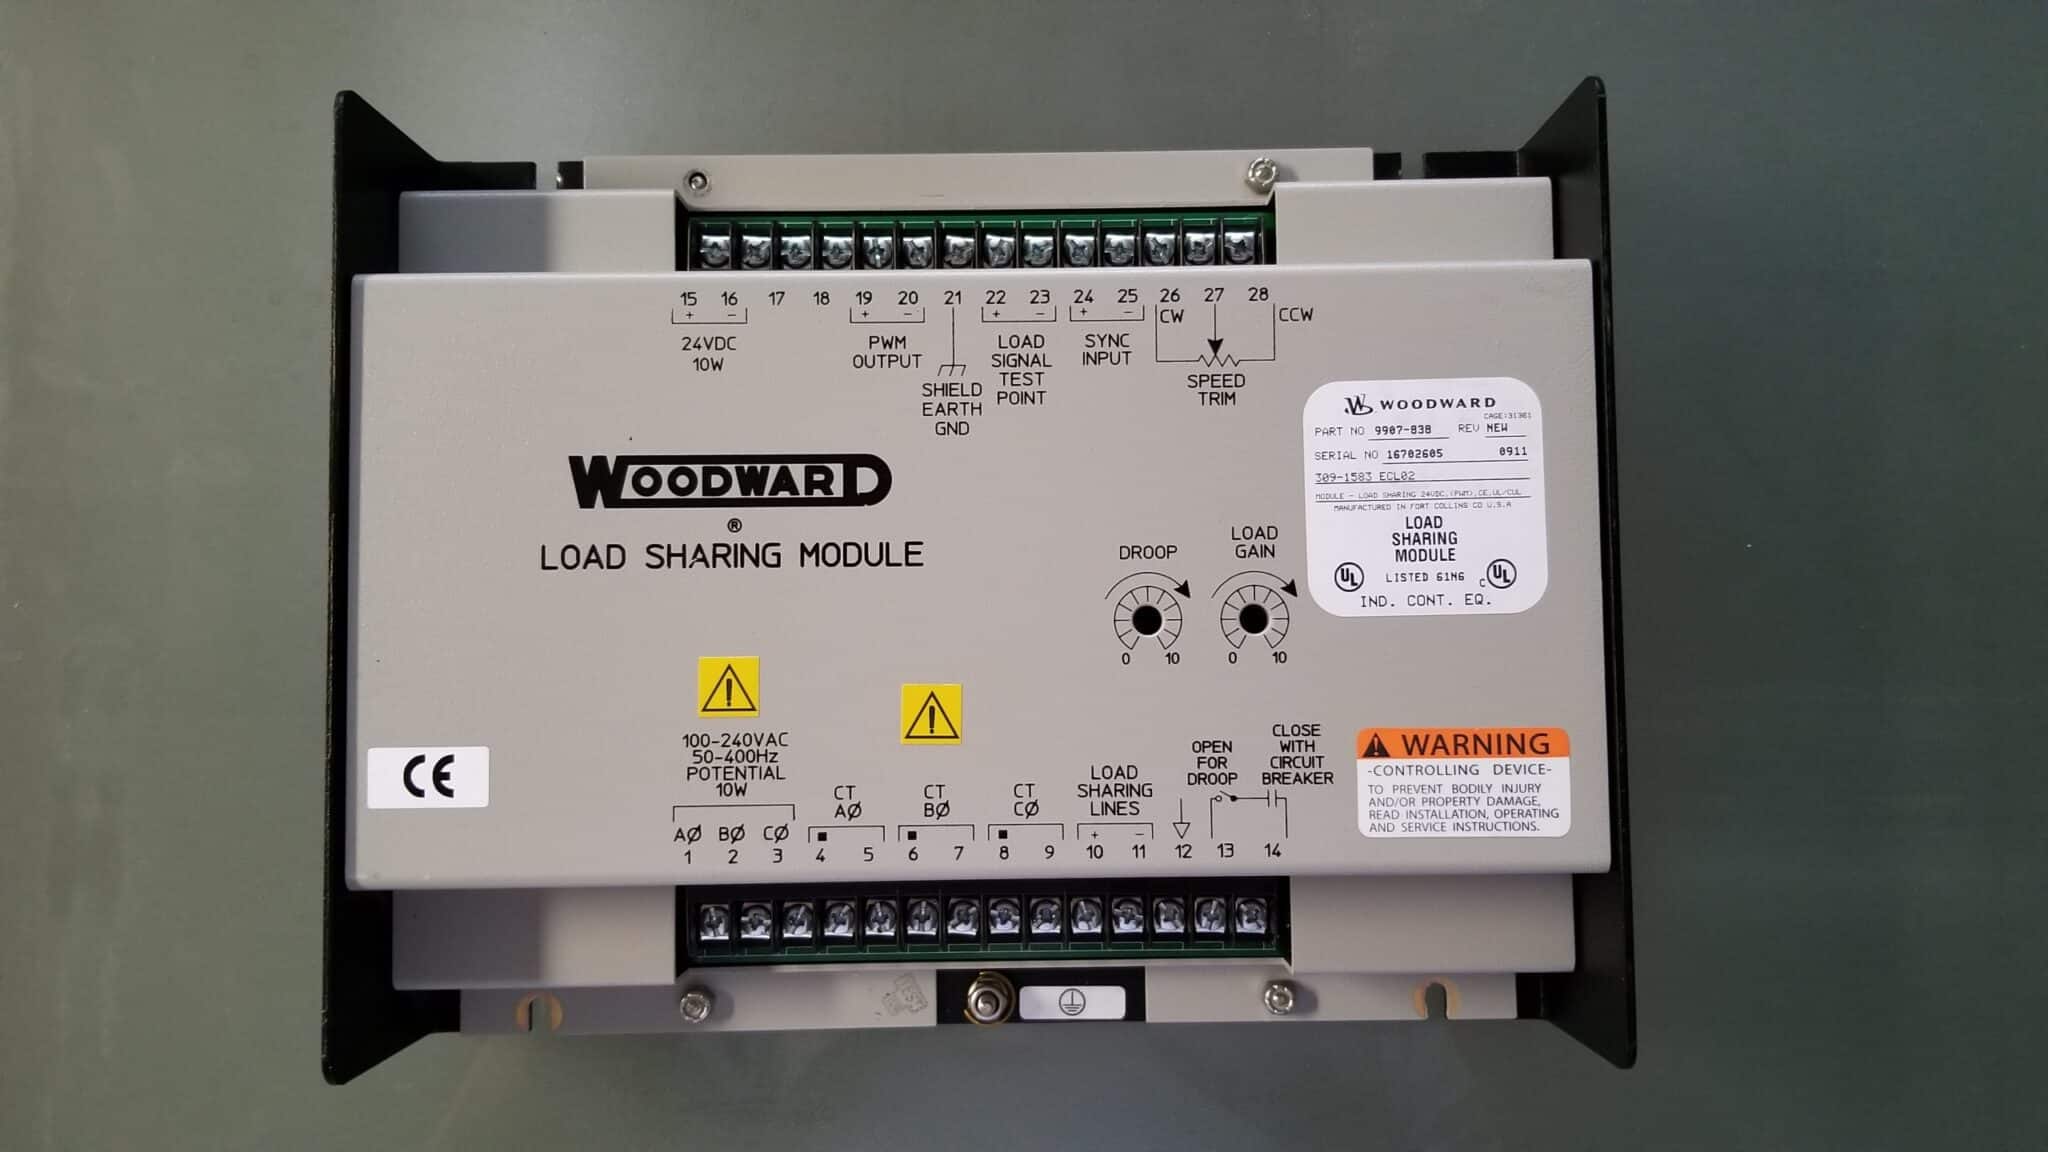 Woodward Load Sharing Module 9907-838 Rev. New – SOLD!